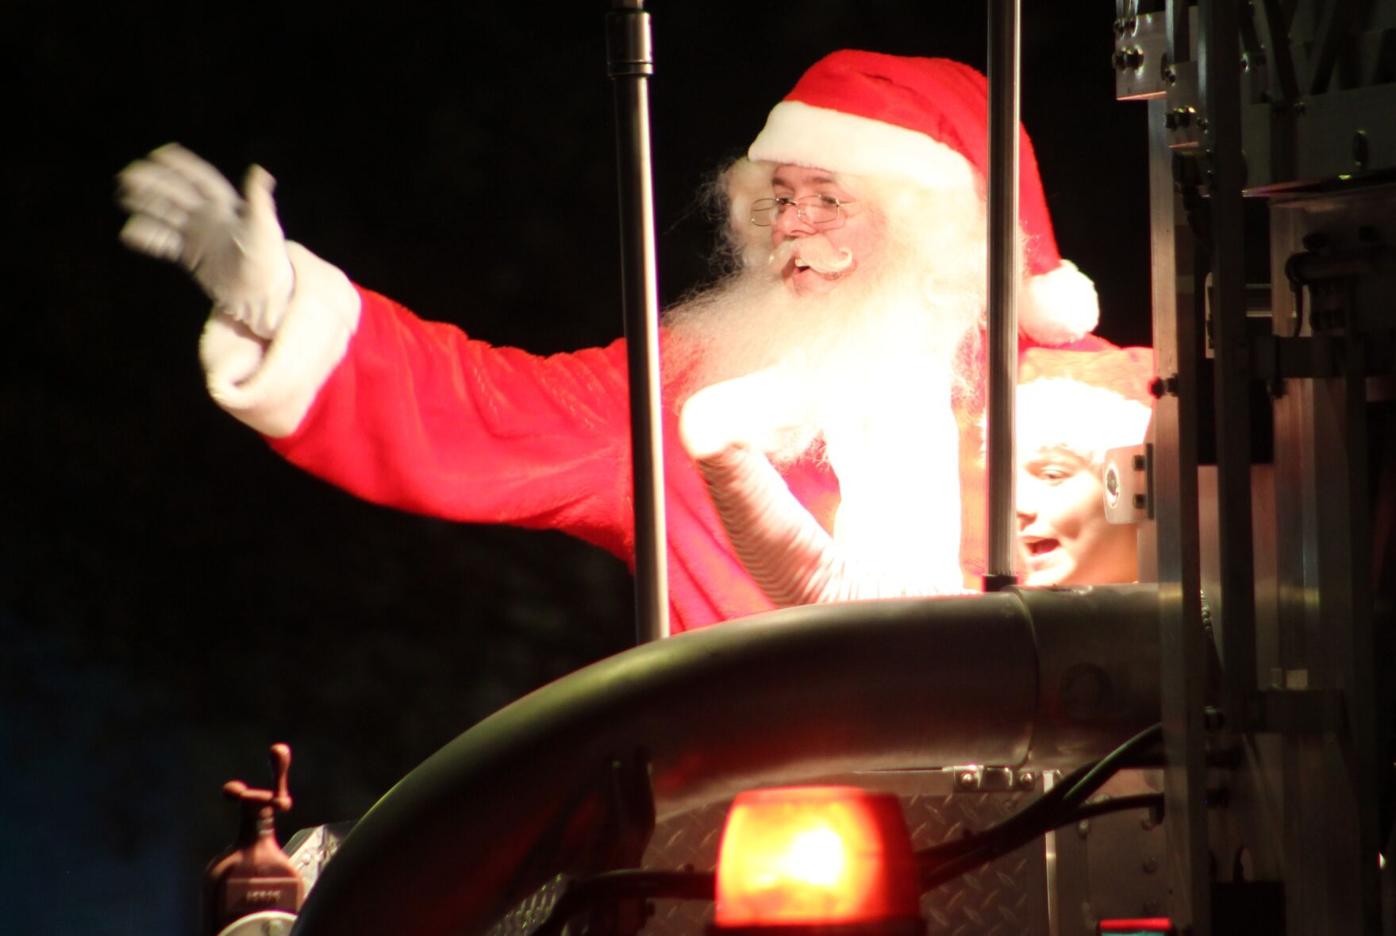 Christmas parades bring out crowds to downtowns